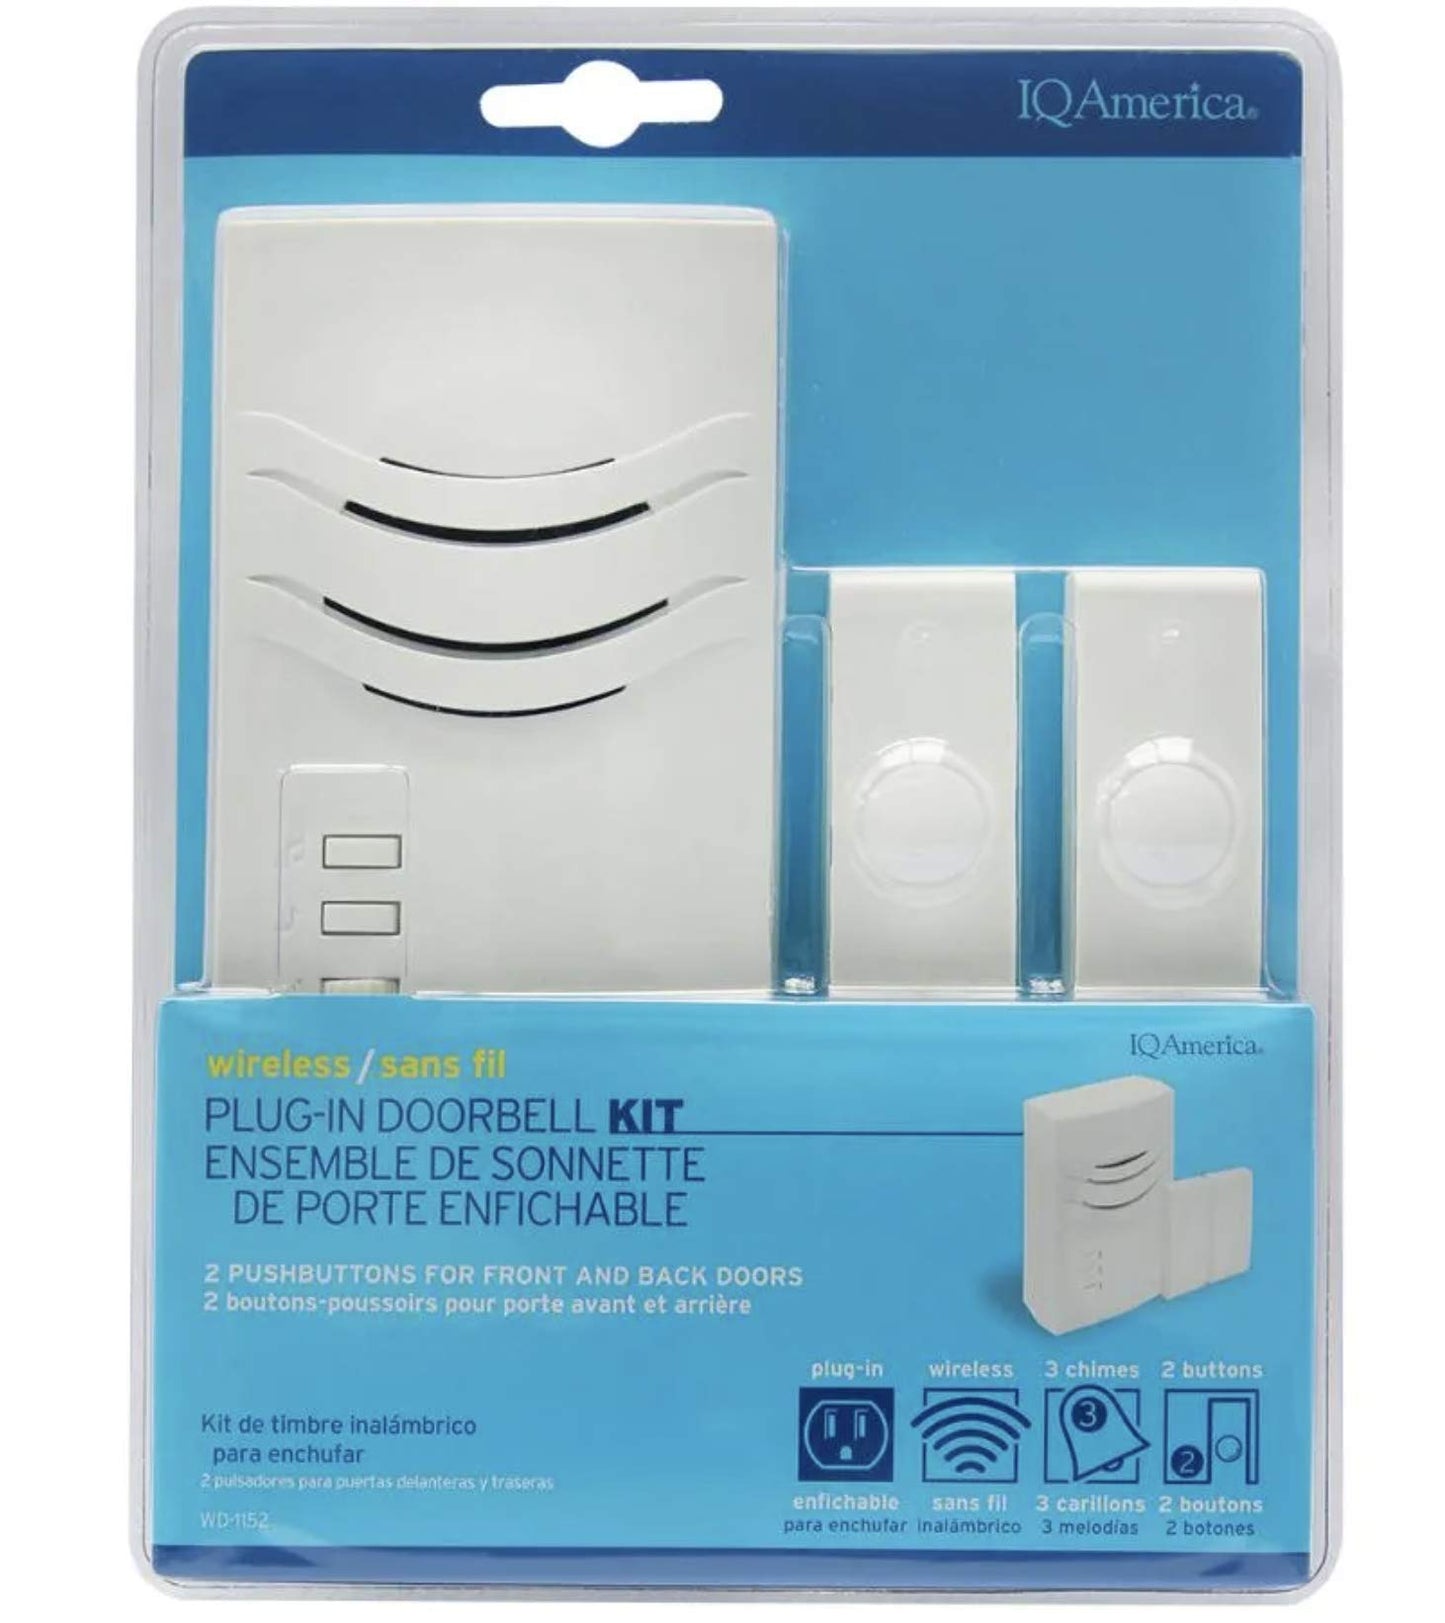 IQ America WD1152 Wireless Plugin Contemporary Door Chime Door Bell 2 Pushbutton 3 Melody Notes Westminster Chime Volume Control 150 foot Range Simple Install Bring It Anywhere RV Cabin Office! White